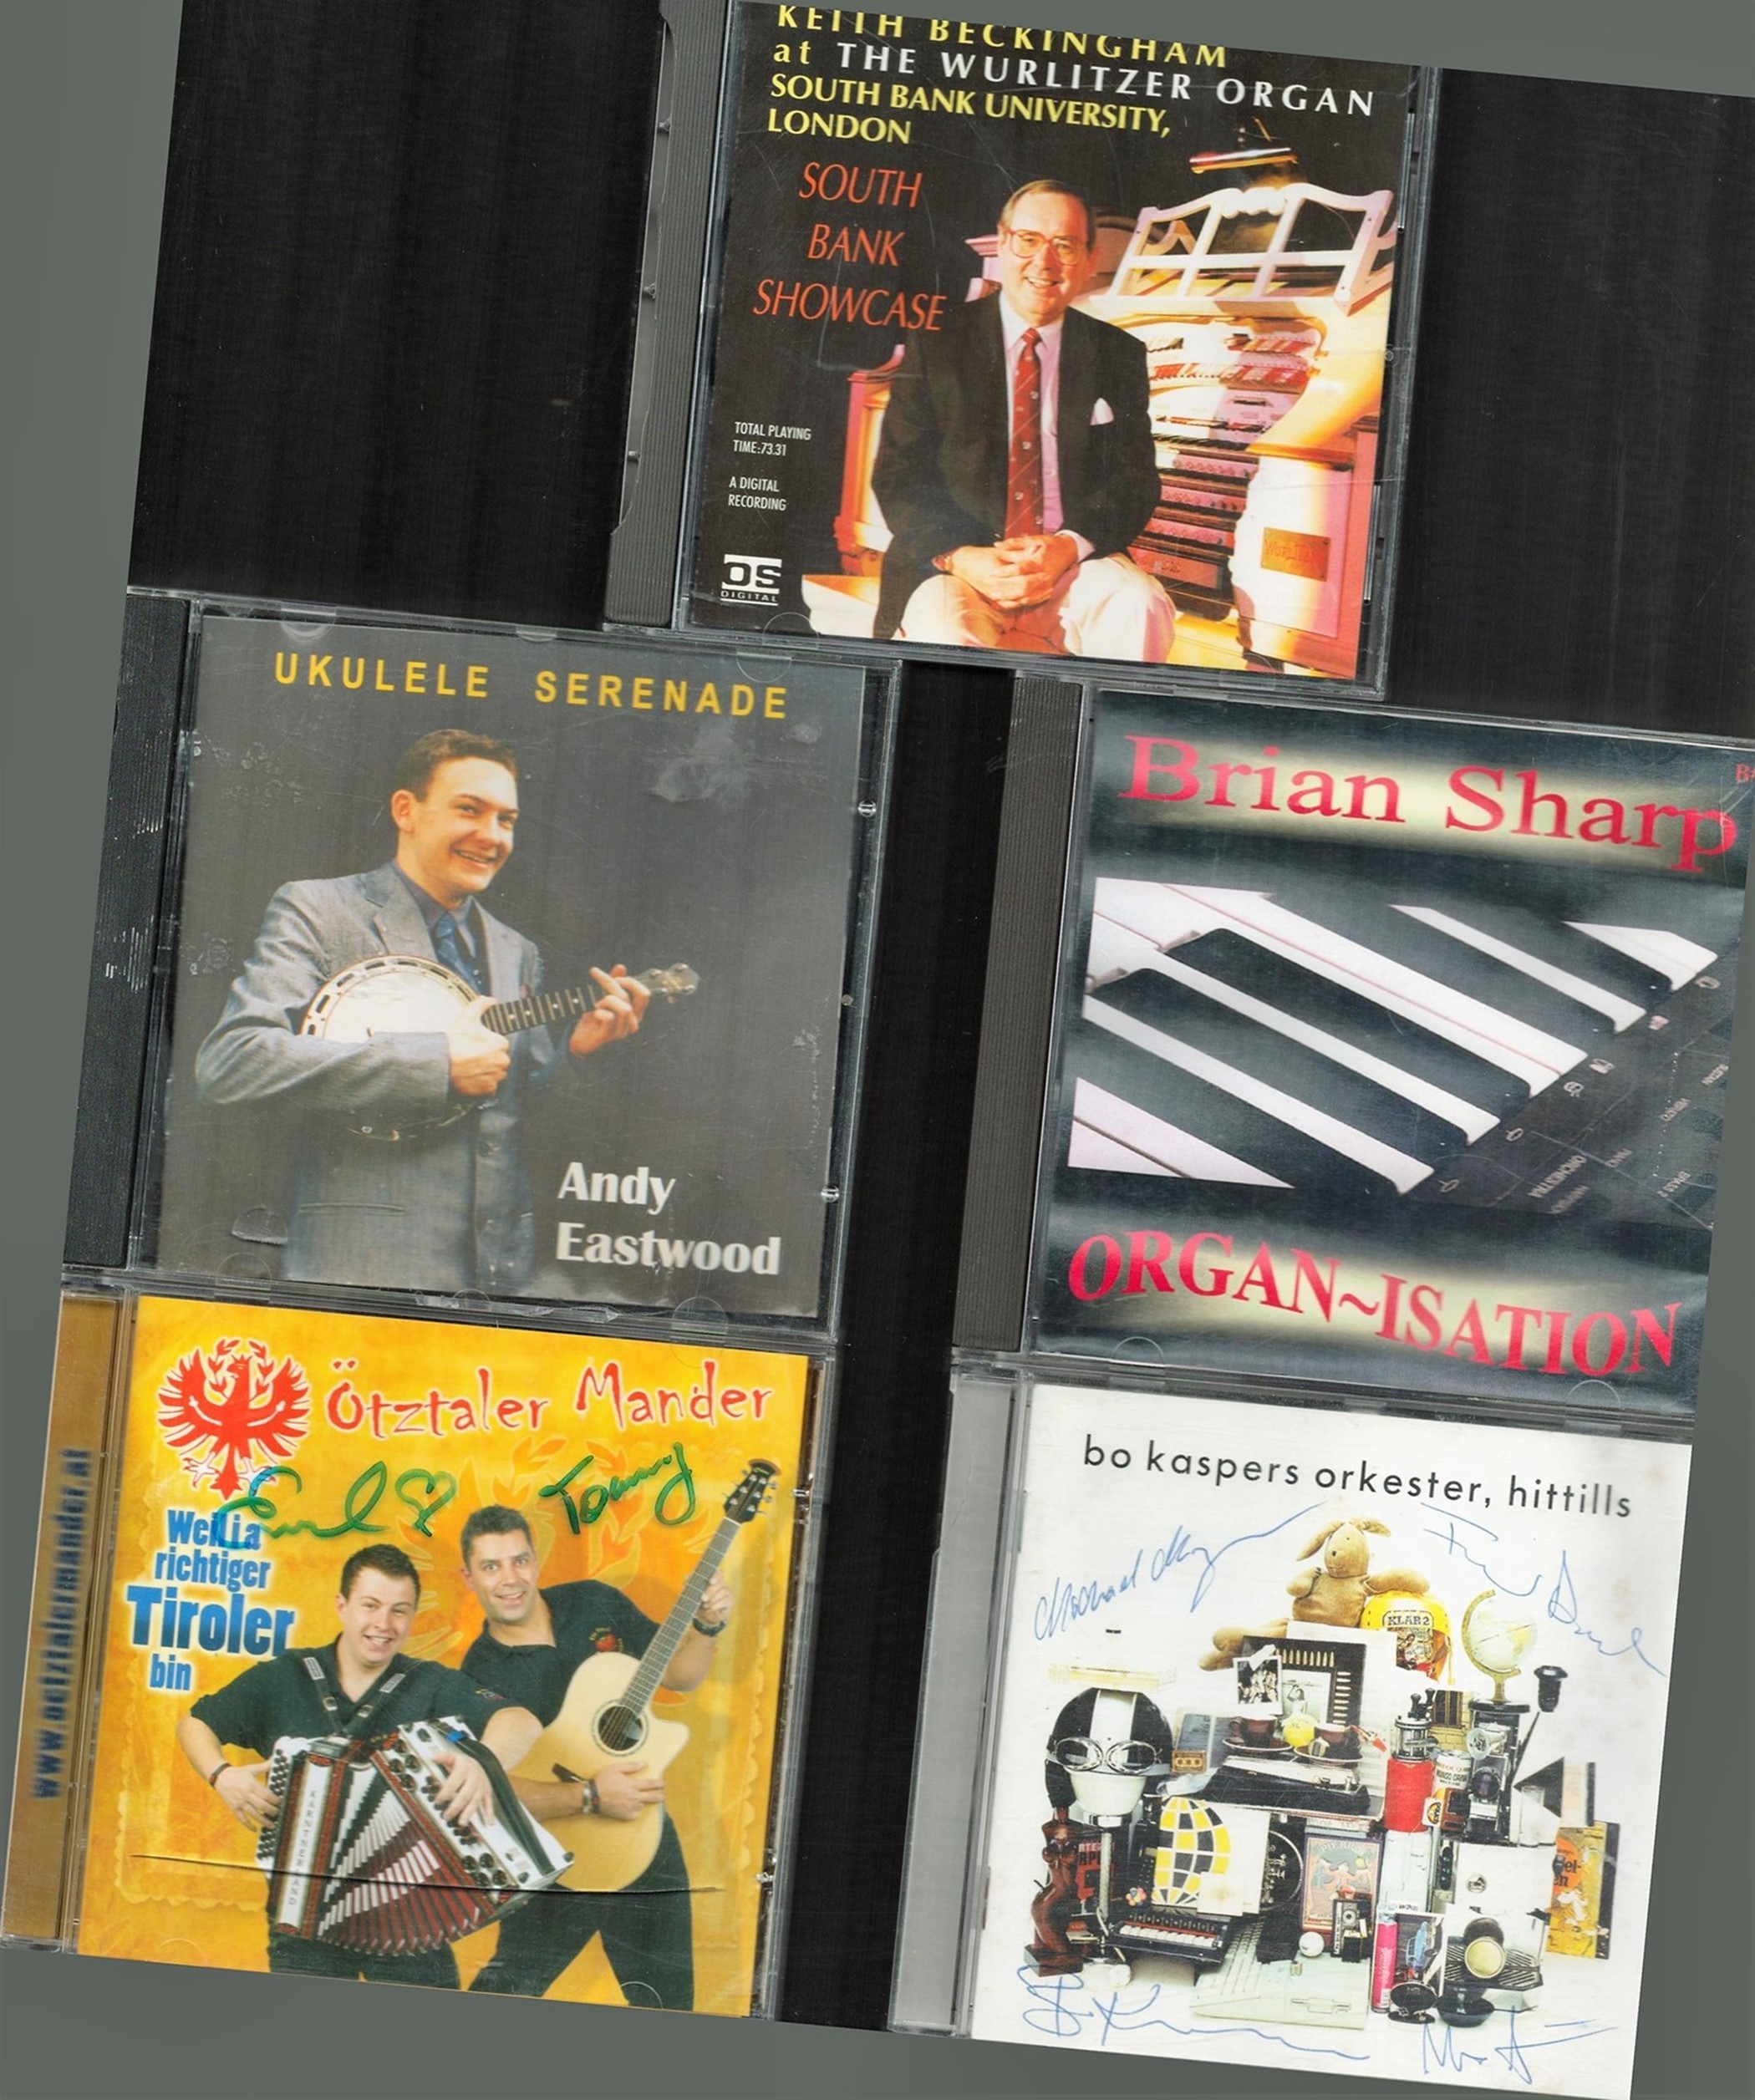 5 Signed CDs, A mixture of Organ and Orchestral Music, Including Keith Beckingham at the Wurlitzer